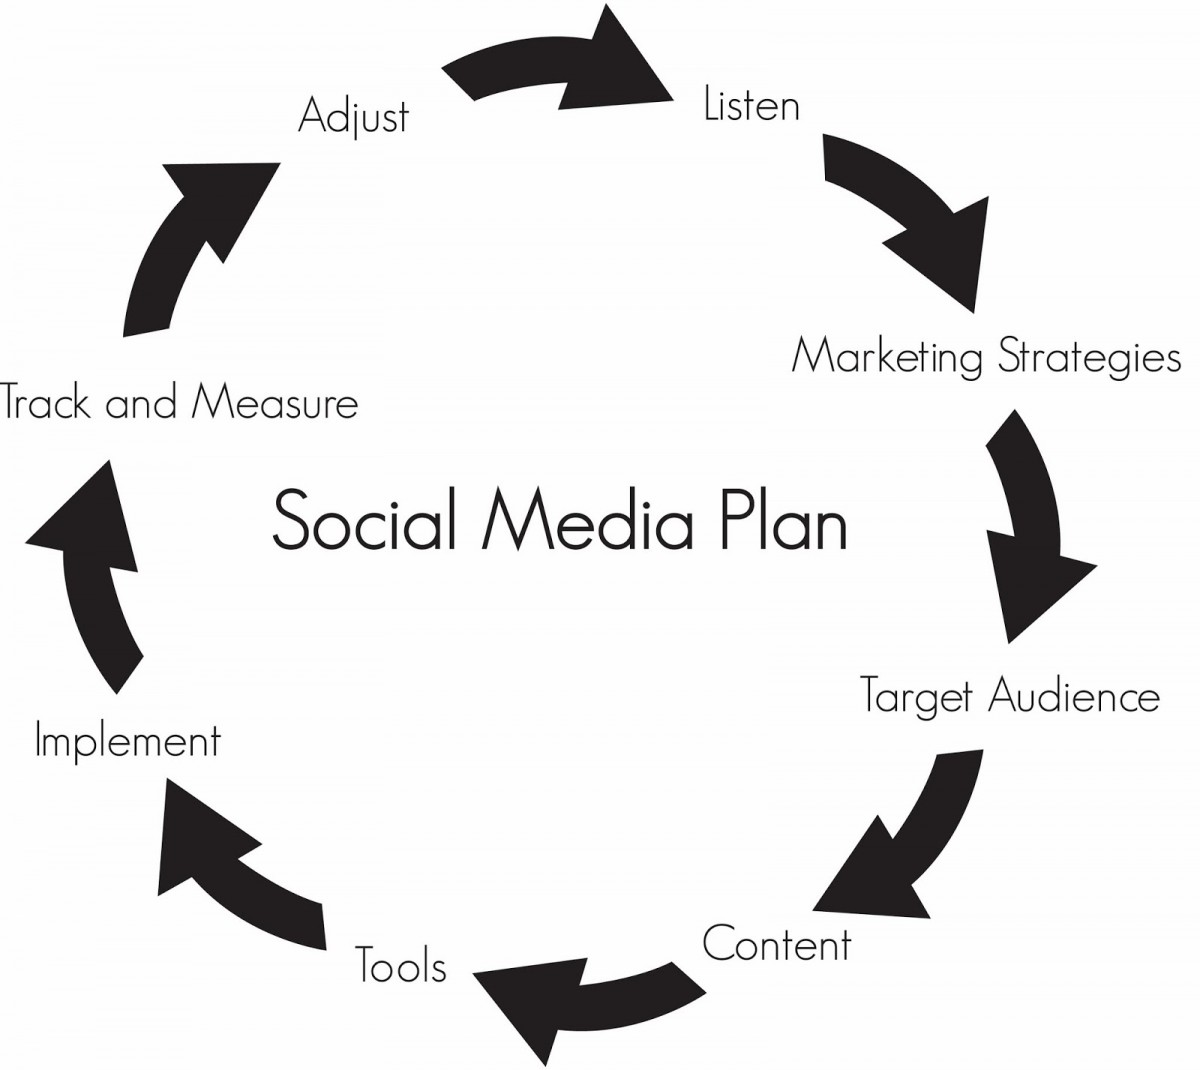 5 objectives to integrate into your social media marketing strategy